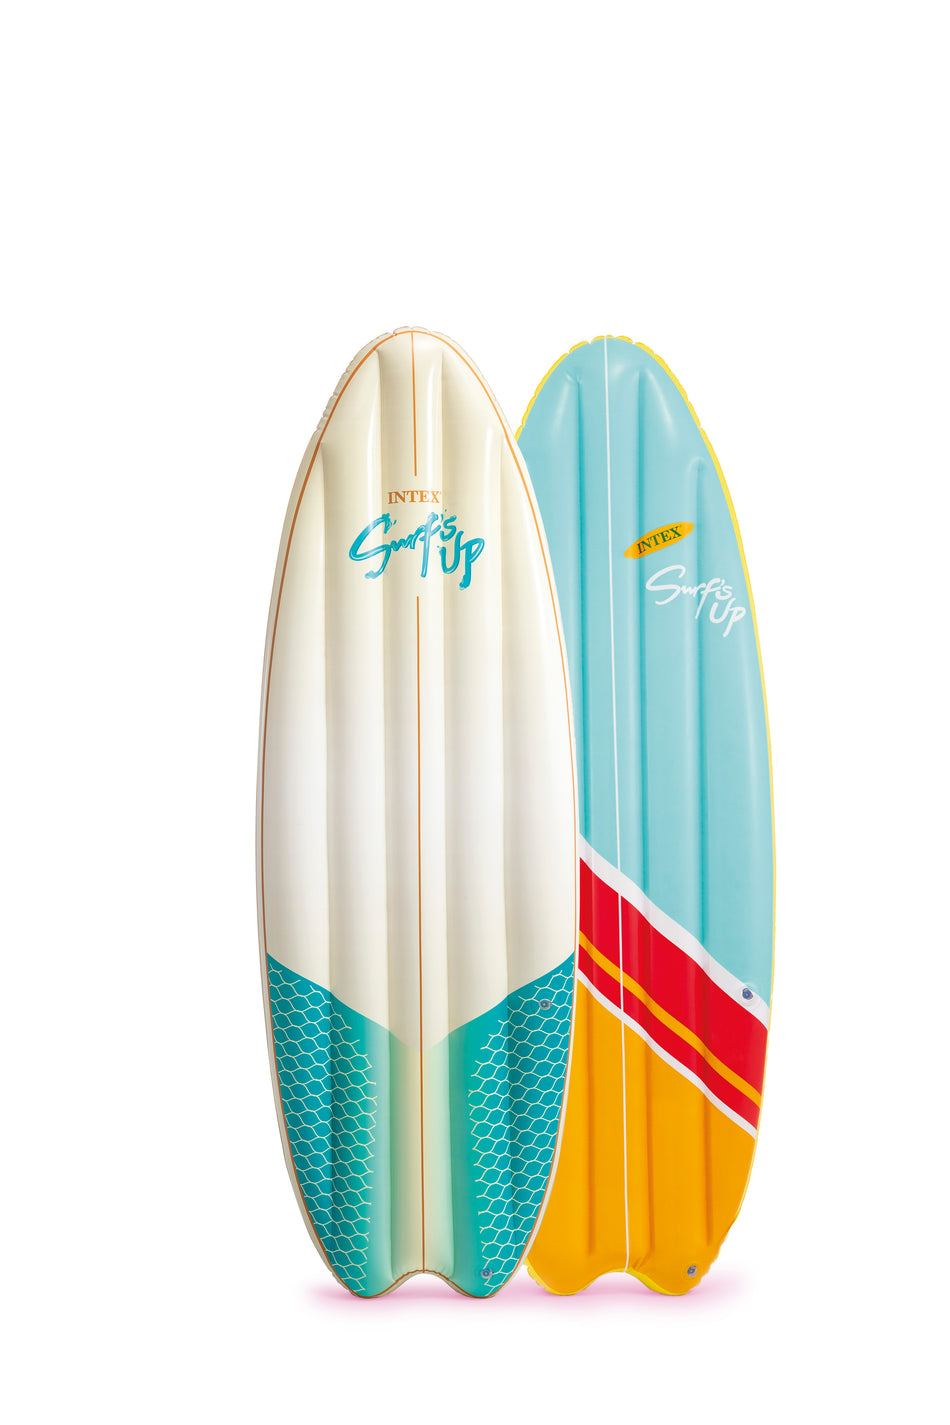 Intex Surf's Up luchtbed 178cm x 69cm